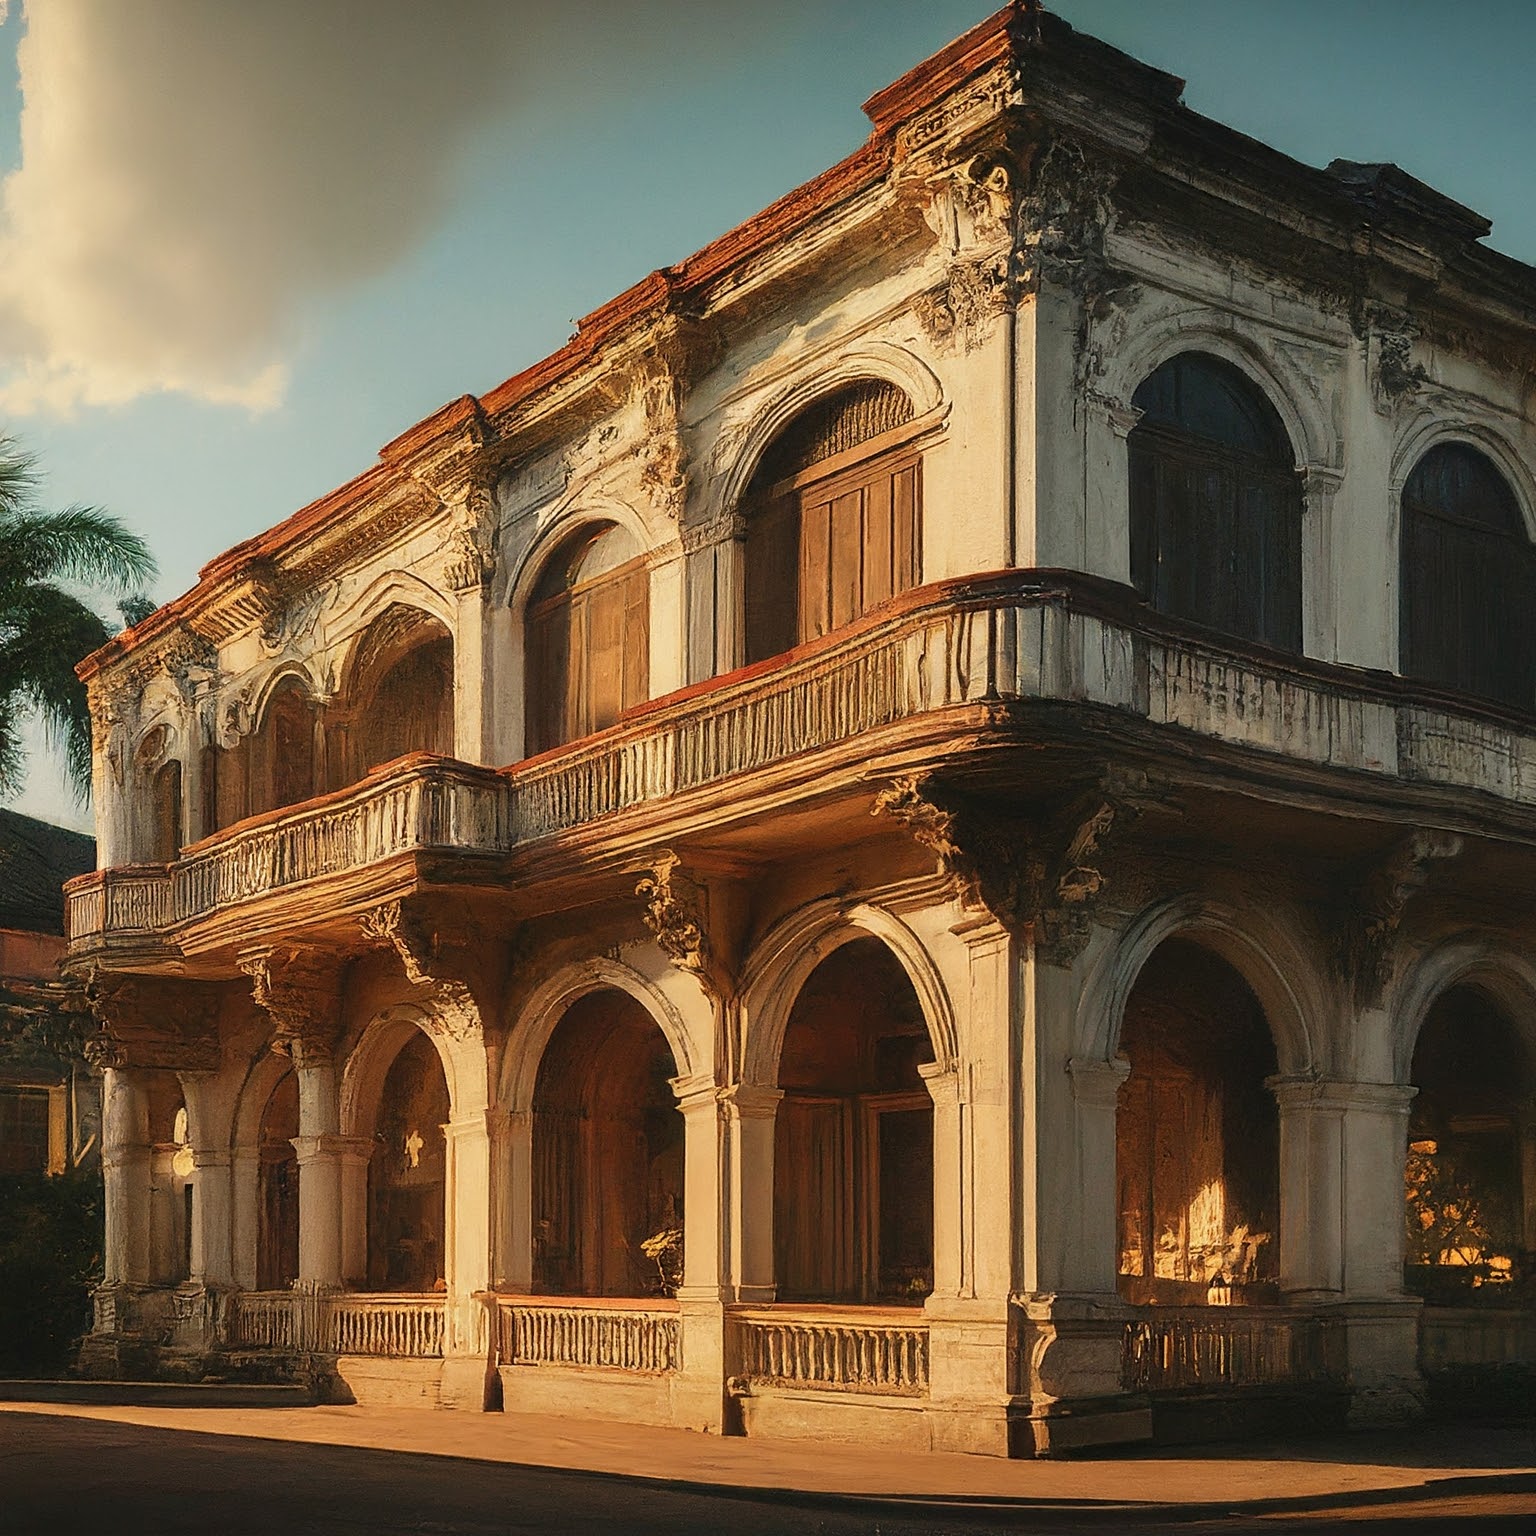 Syquia Mansion in Vigan, Philippines, a historic landmark with intricate carvings and balconies.